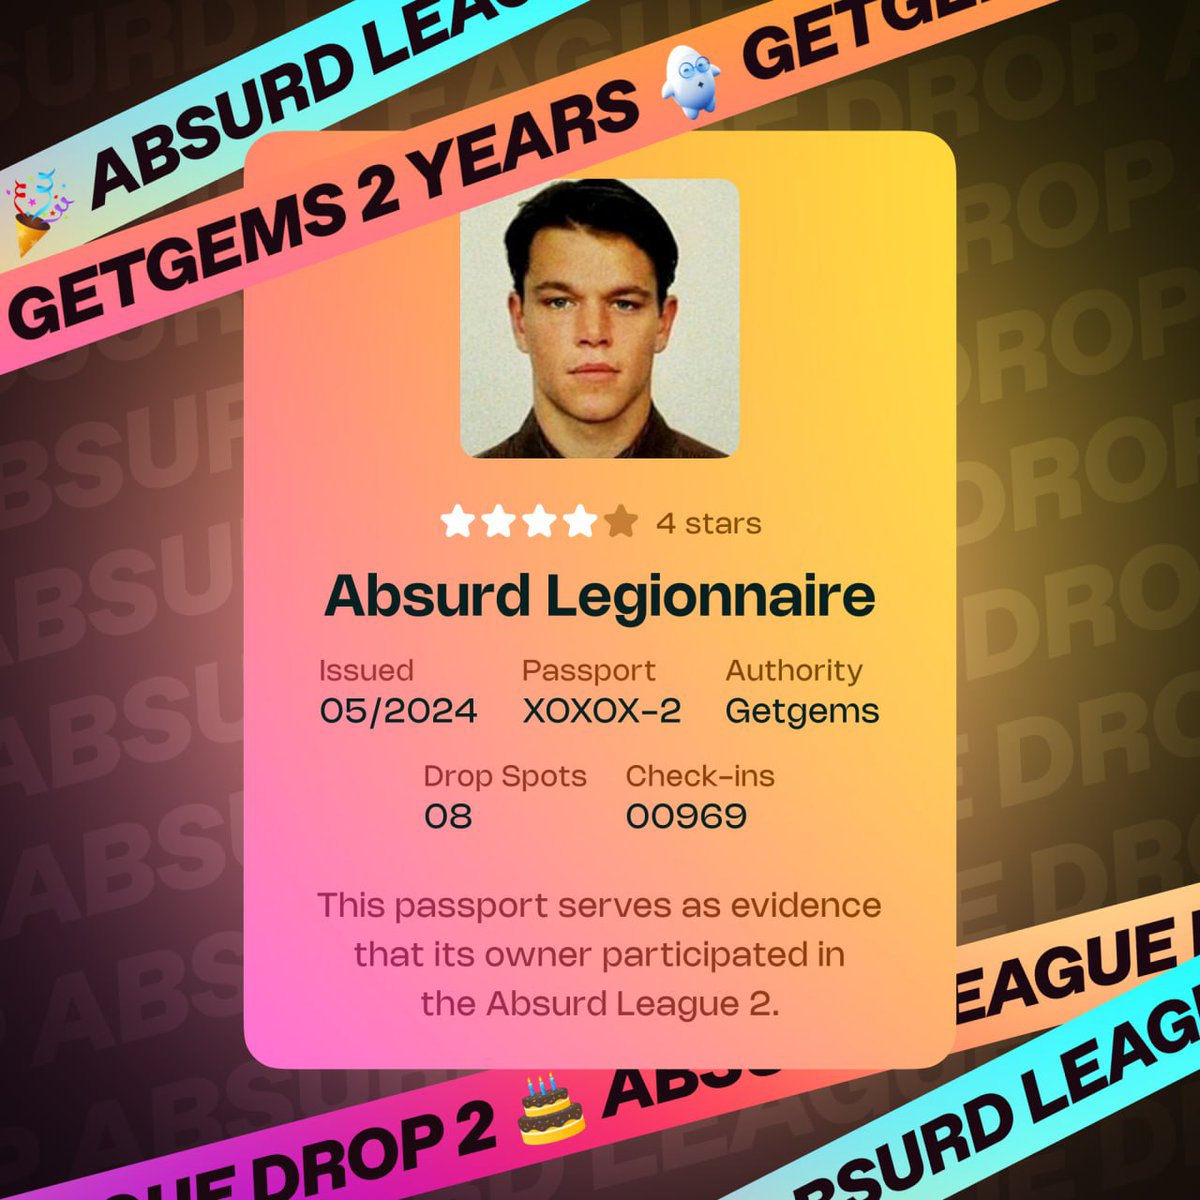 🏅 Second Season Results of the Absurd League 🏅 1️⃣ Absurd Legionnaire NFT Passports were sent to all participants! 2⃣Top transactions winners received prizes of up to 333 TON 3⃣ Raffle of 25,000 USDT took place & prizes are heading to 800 lucky winners Detailed info: